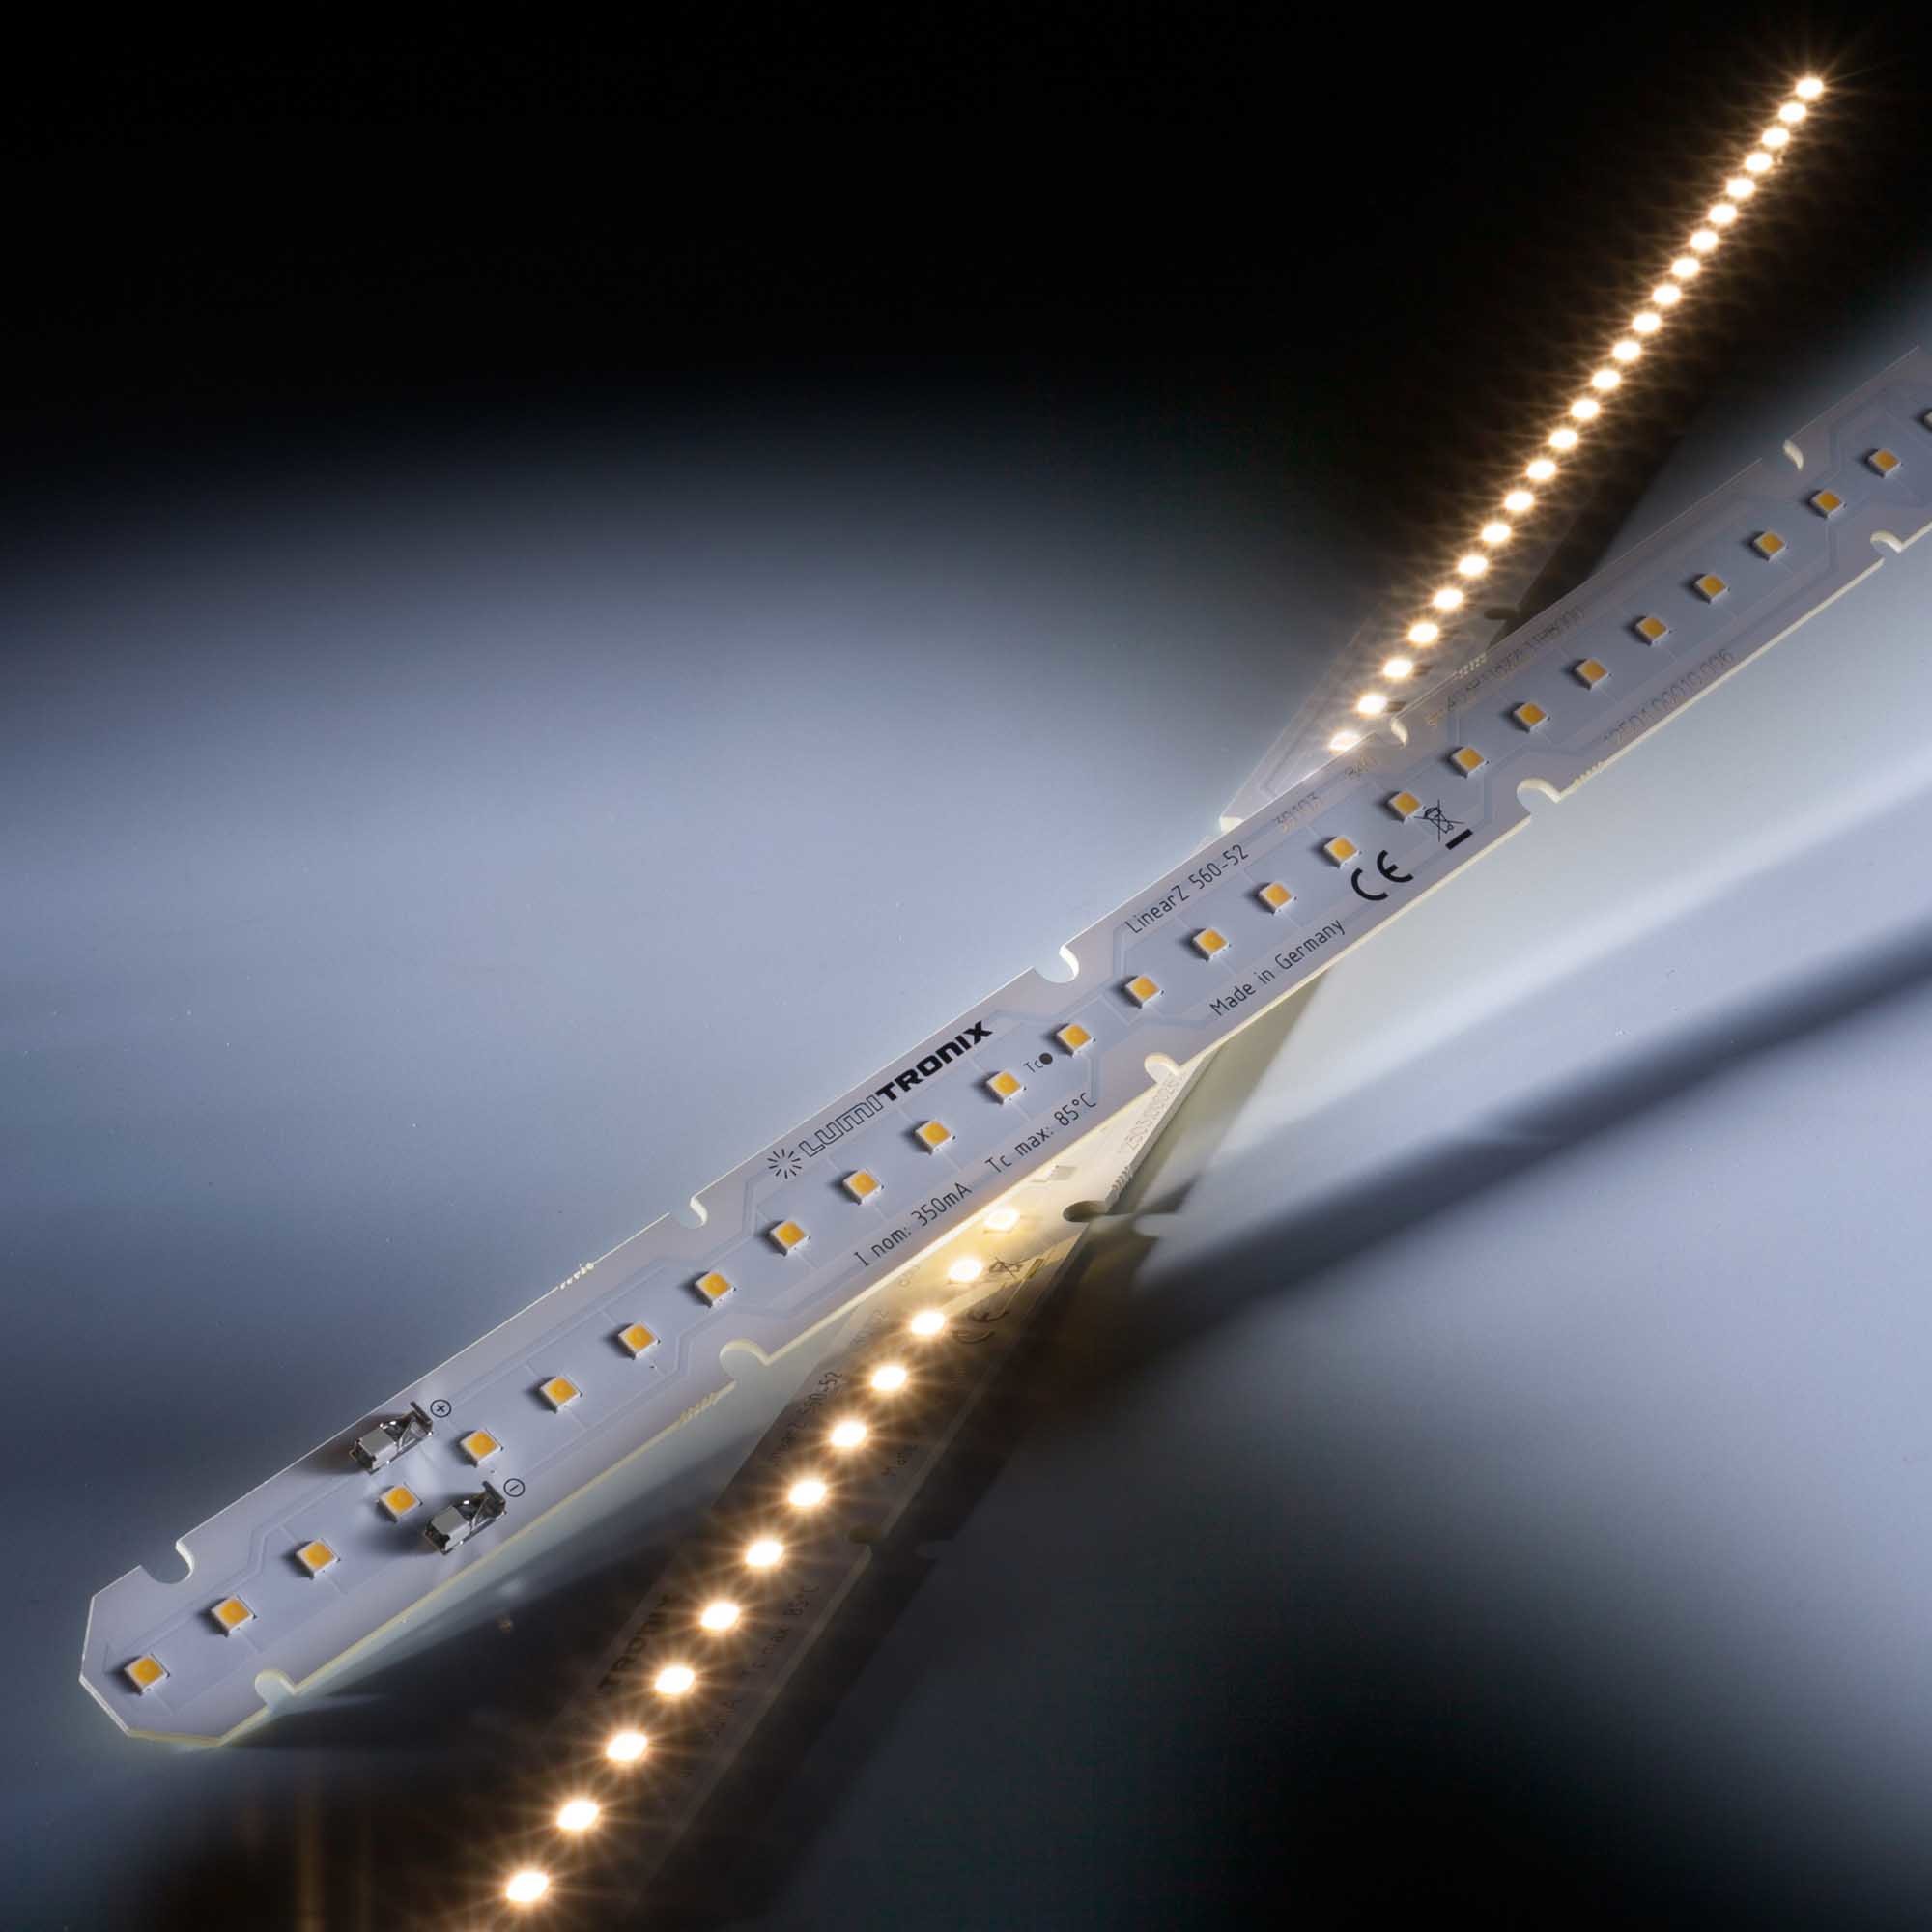 LumiBar-52-RSP Horticulture Nichia Rsp0a LED Strip Zhaga pure white 5000K 28PPF 1780lm 350mA 37.5V 52 LEDs 22.05in/56cm module (969lm/ft 7.2W/ft)